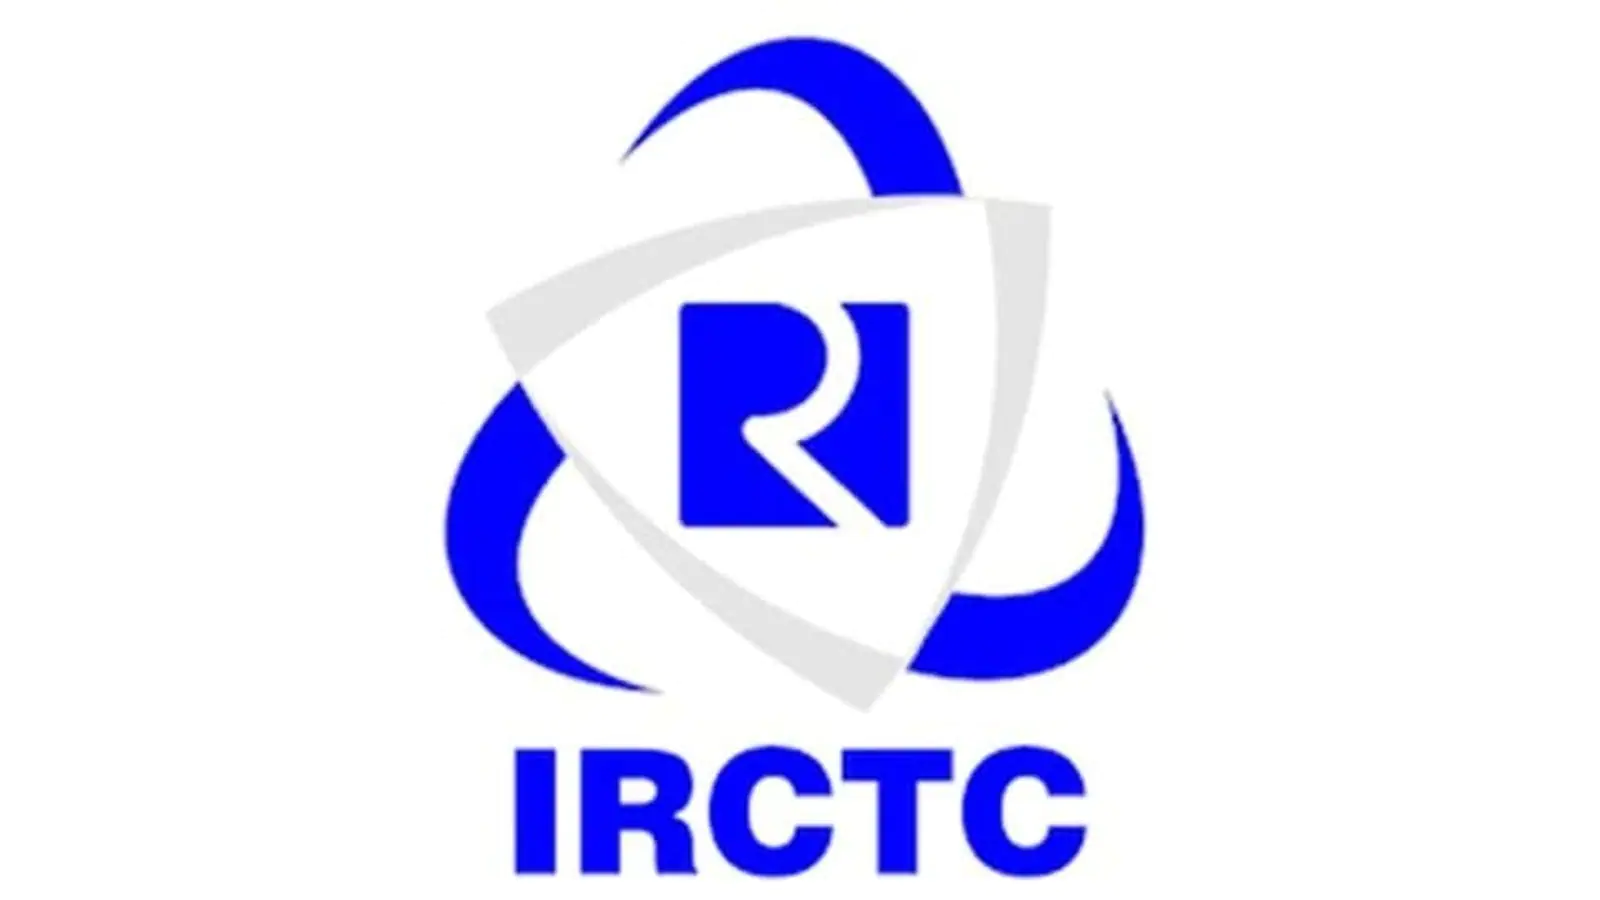 IRCTC says its Q1 revenue jumped by 250% this financial year